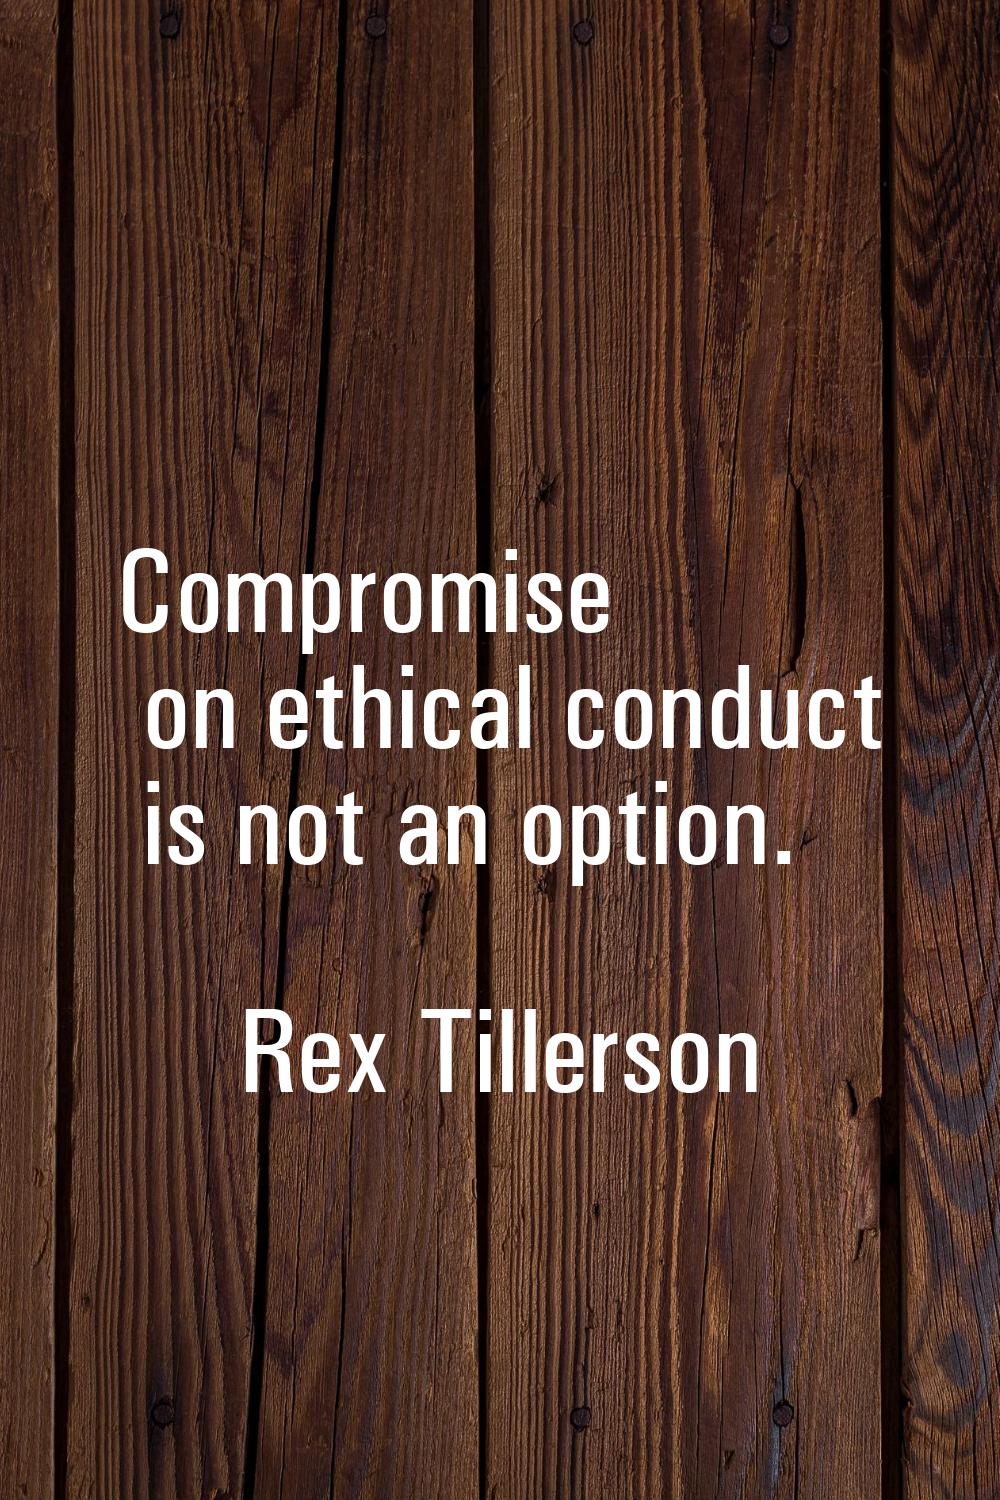 Compromise on ethical conduct is not an option.